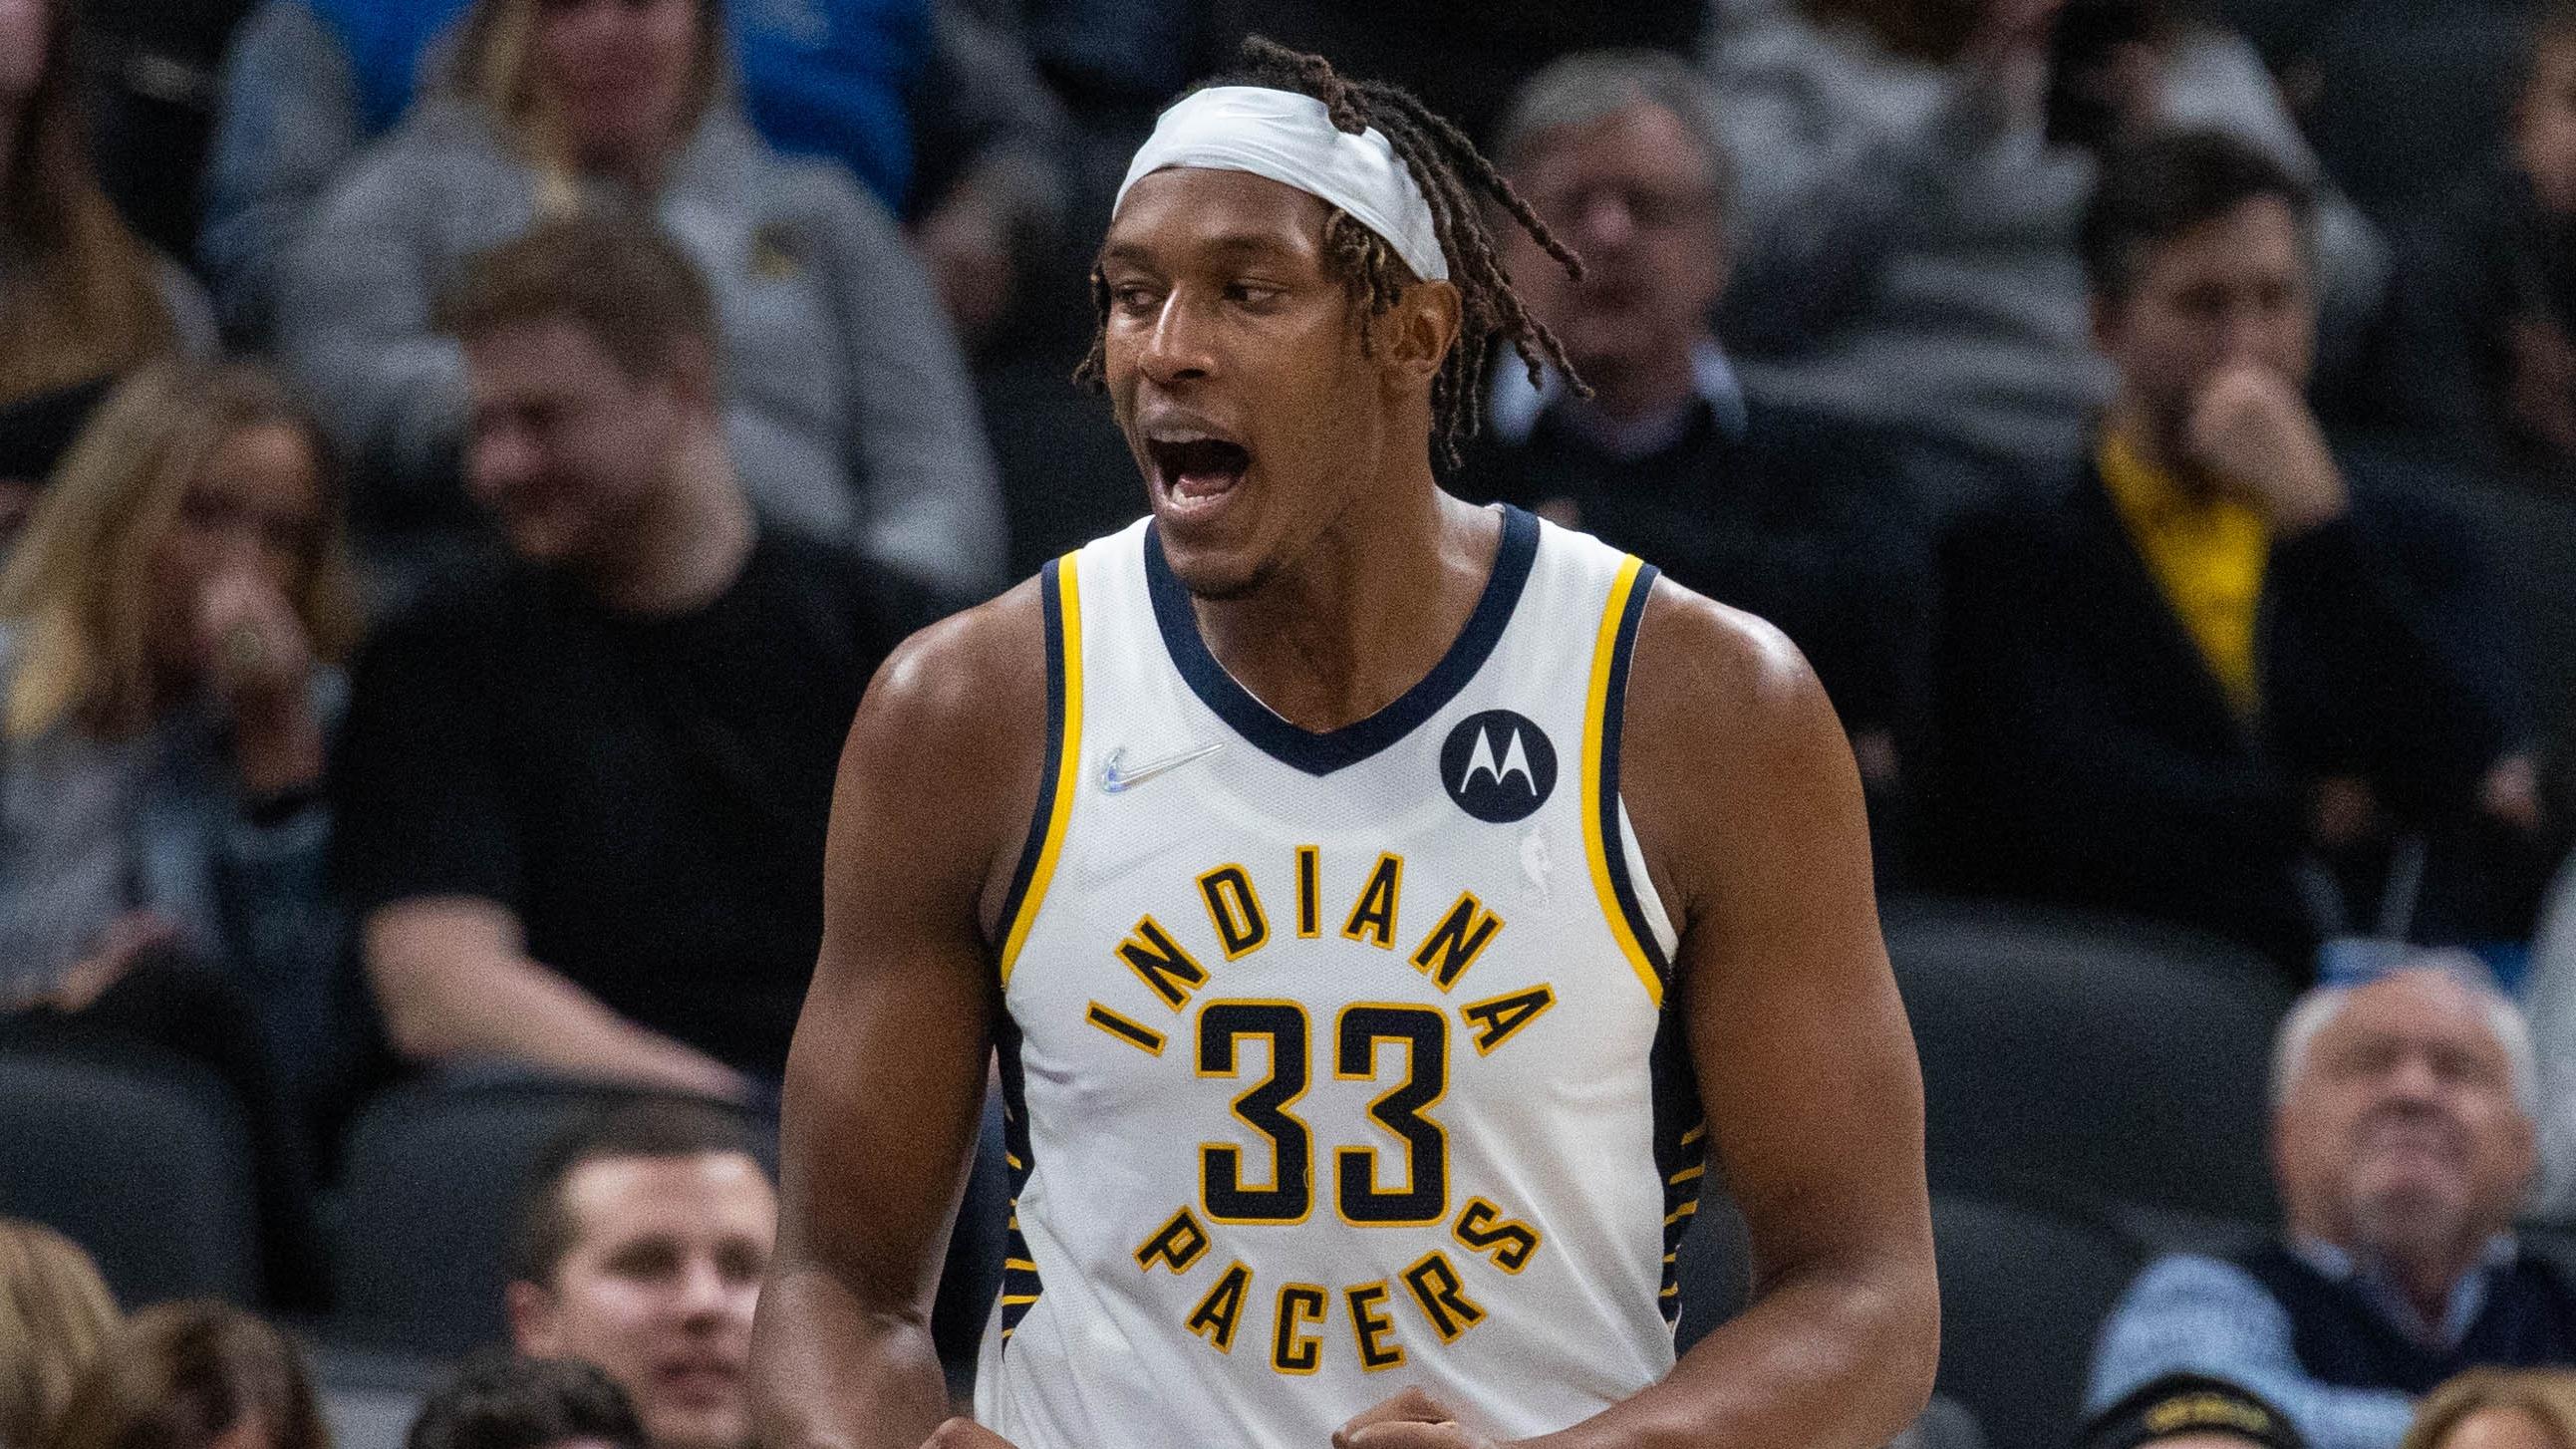 Dec 6, 2021; Indianapolis, Indiana, USA; Indiana Pacers center Myles Turner (33) reacts to a block in the second half against the Washington Wizards at Gainbridge Fieldhouse. / Trevor Ruszkowski-USA TODAY Sports